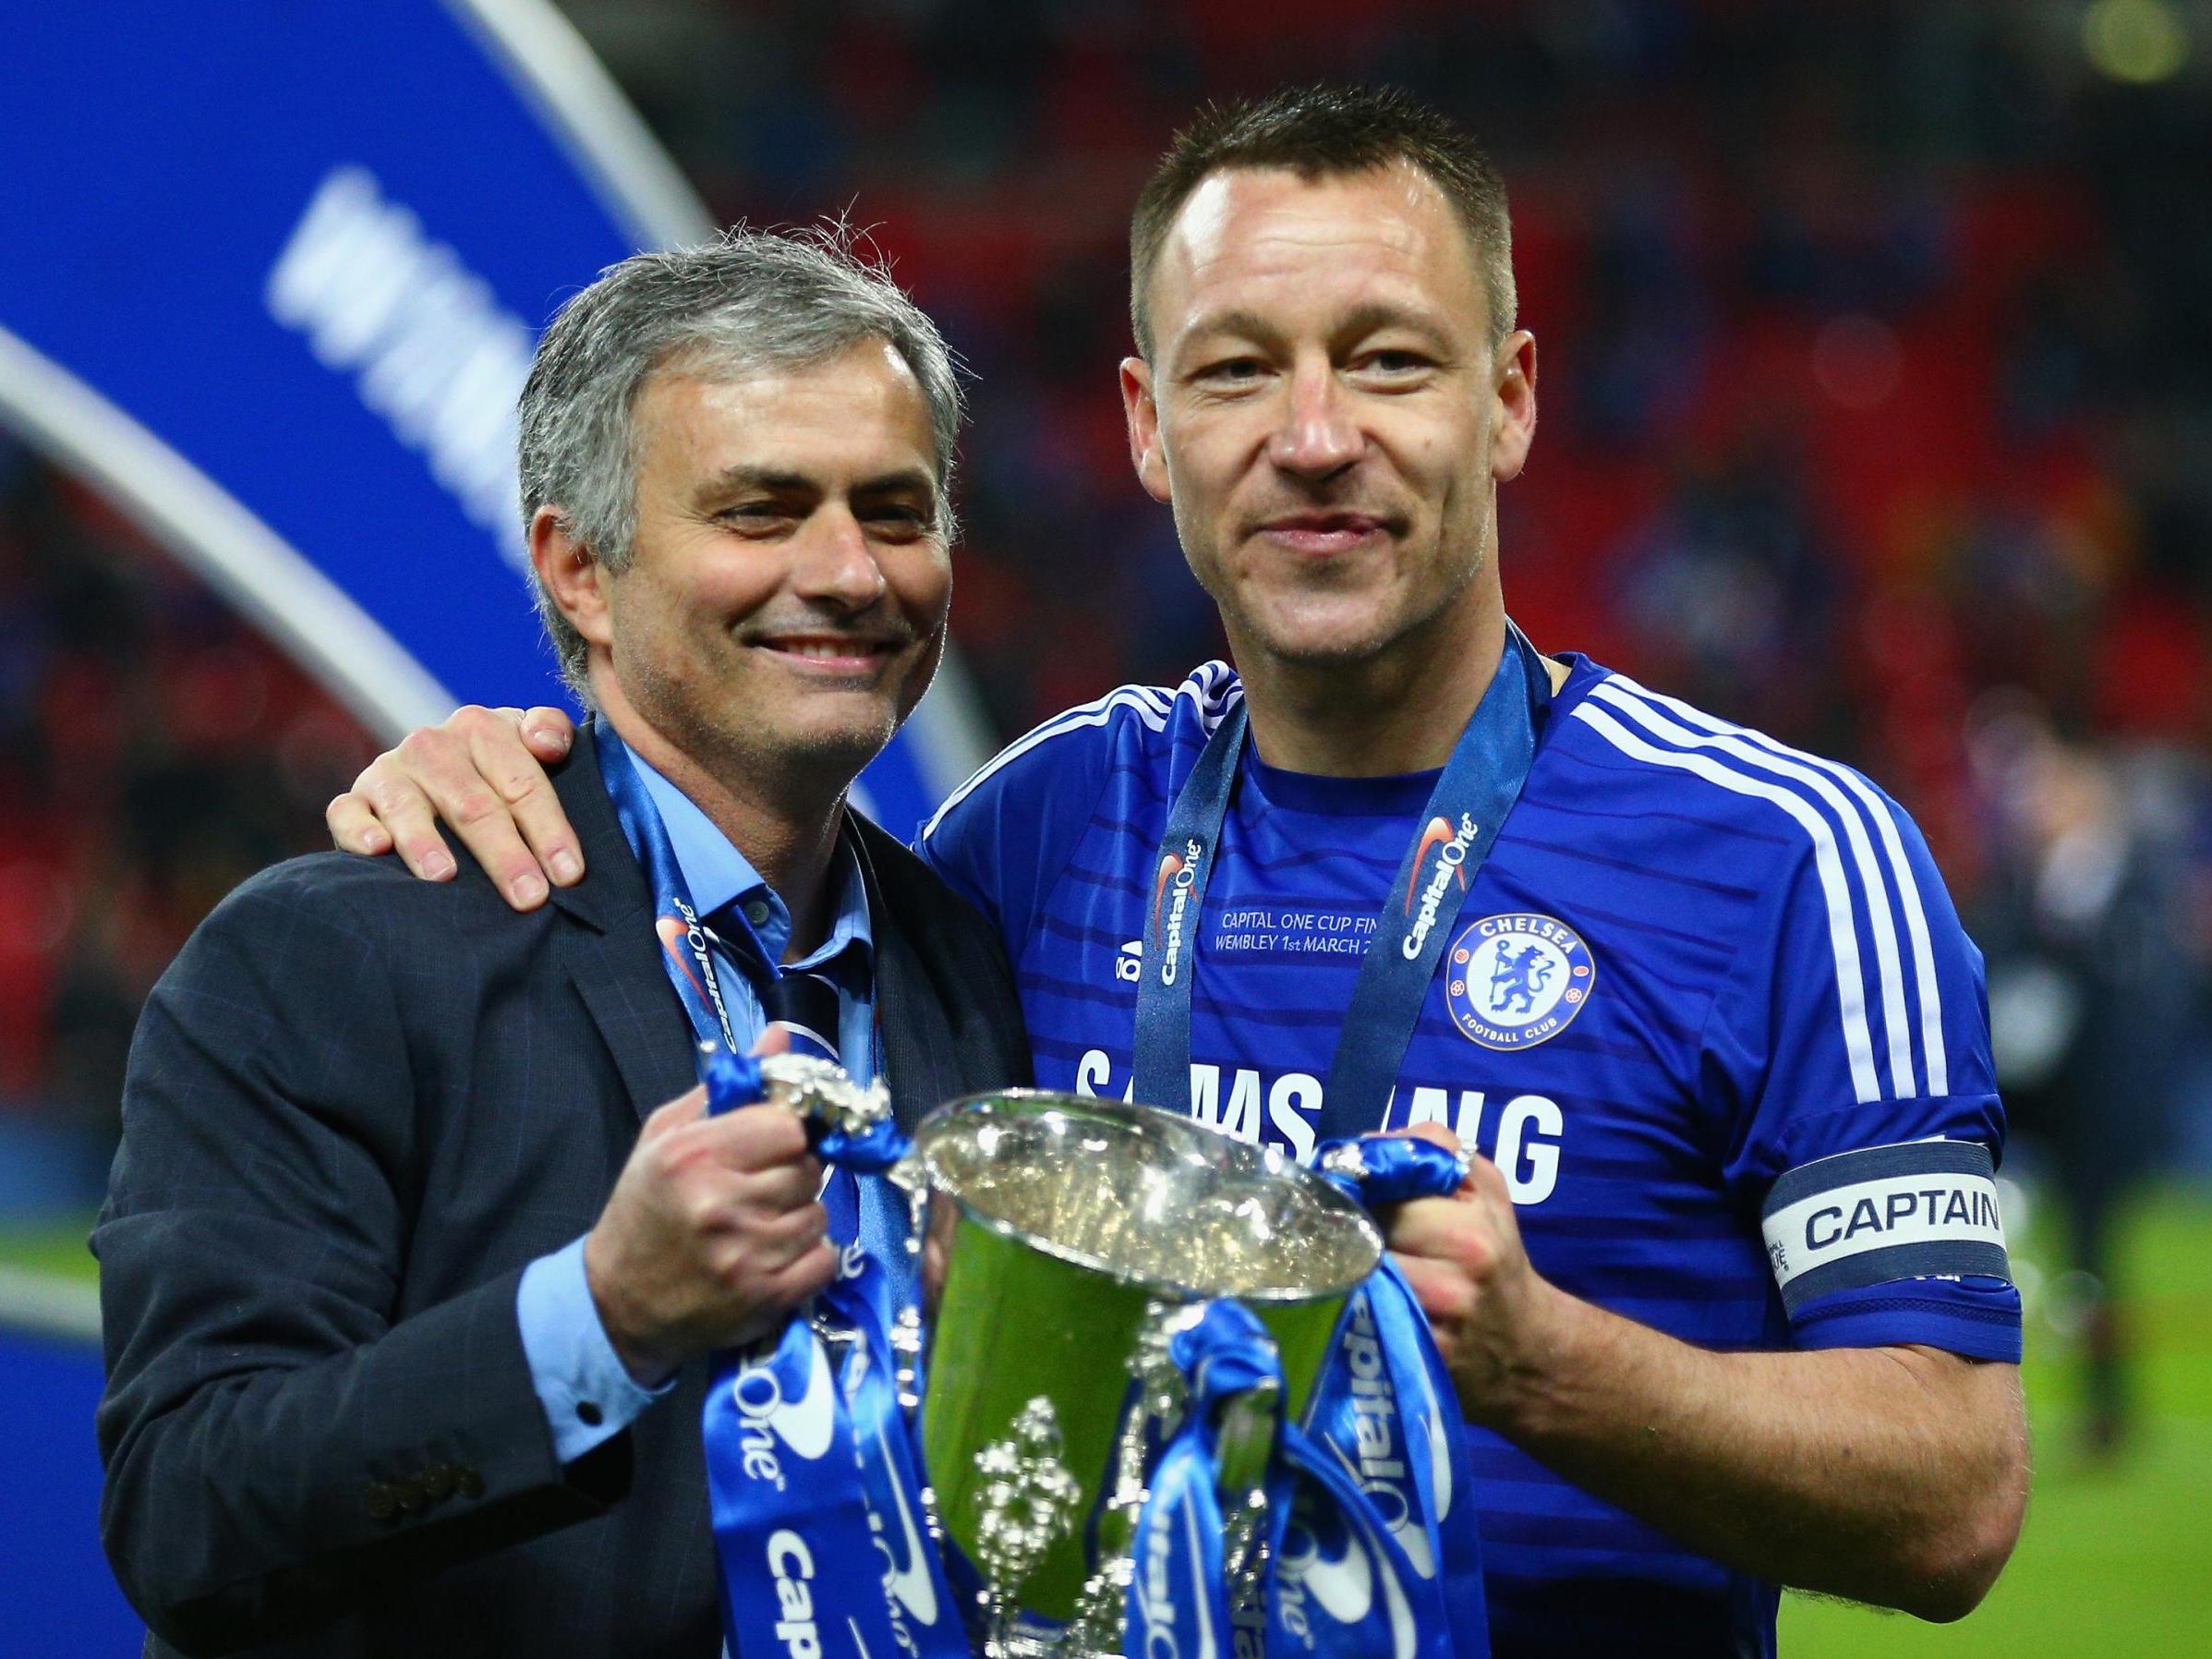 Jose Mourinho and John Terry with the League Cup trophy